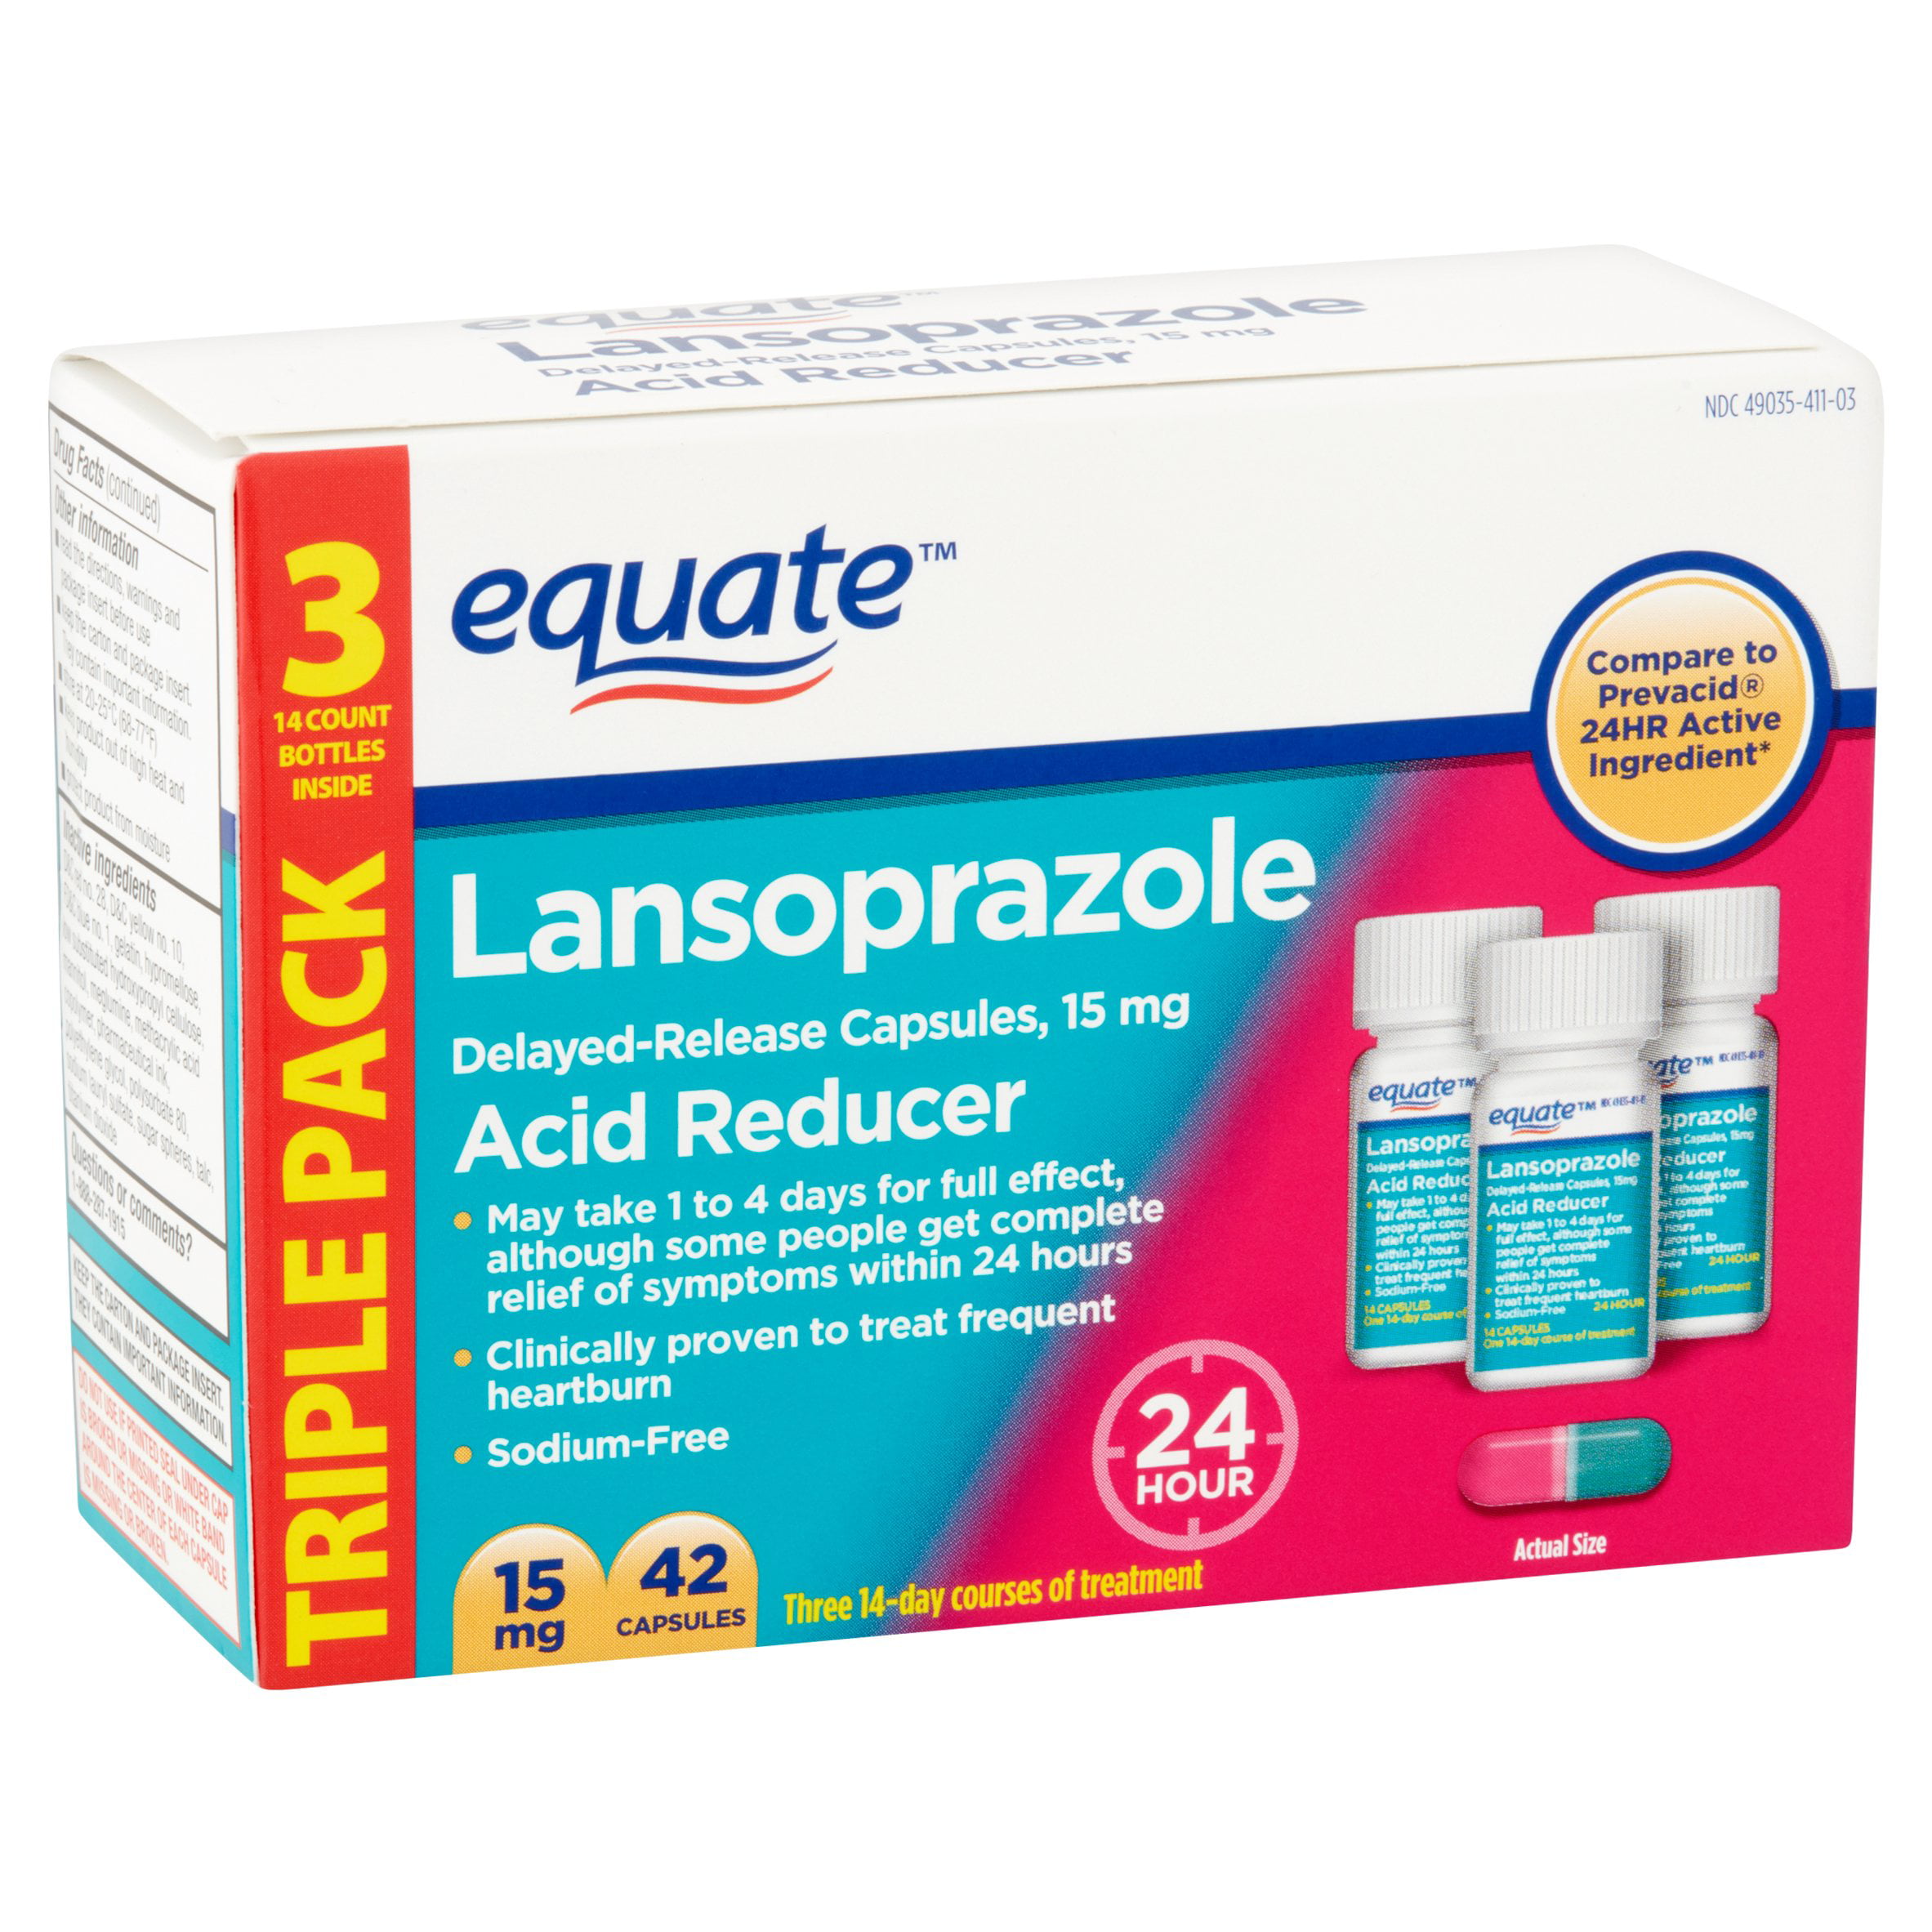 lansoprazole uses and side effects